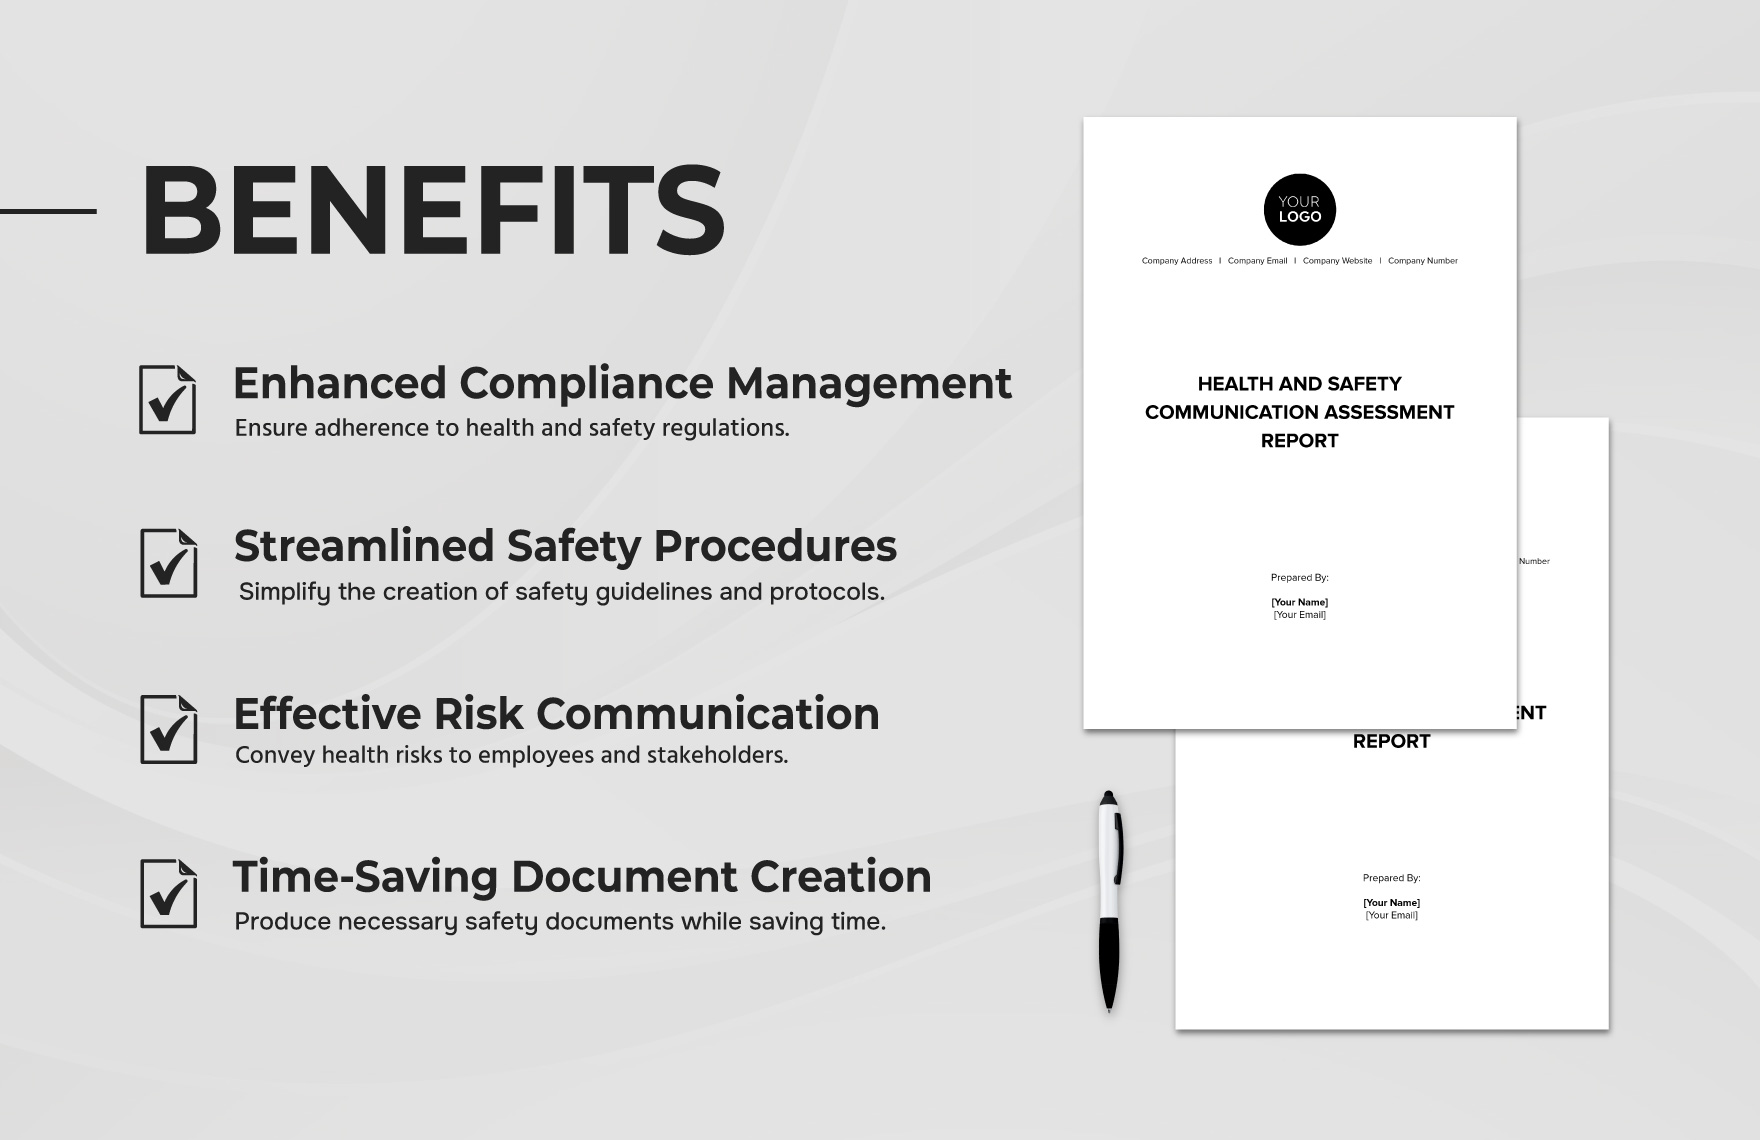 Health Safety Communication Assessment Report Template